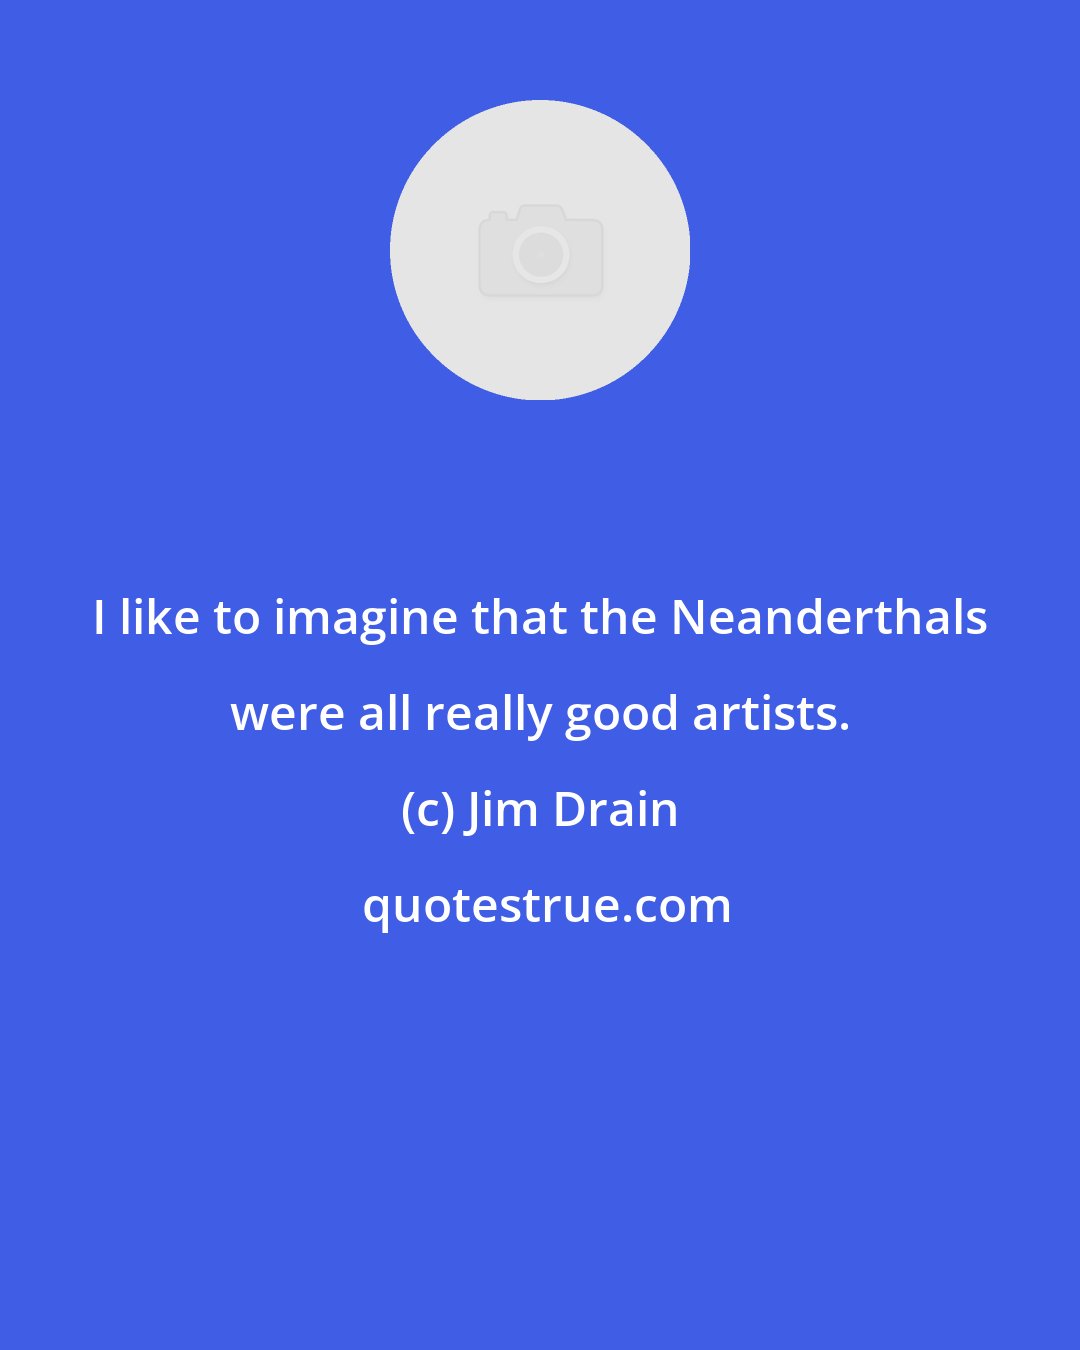 Jim Drain: I like to imagine that the Neanderthals were all really good artists.